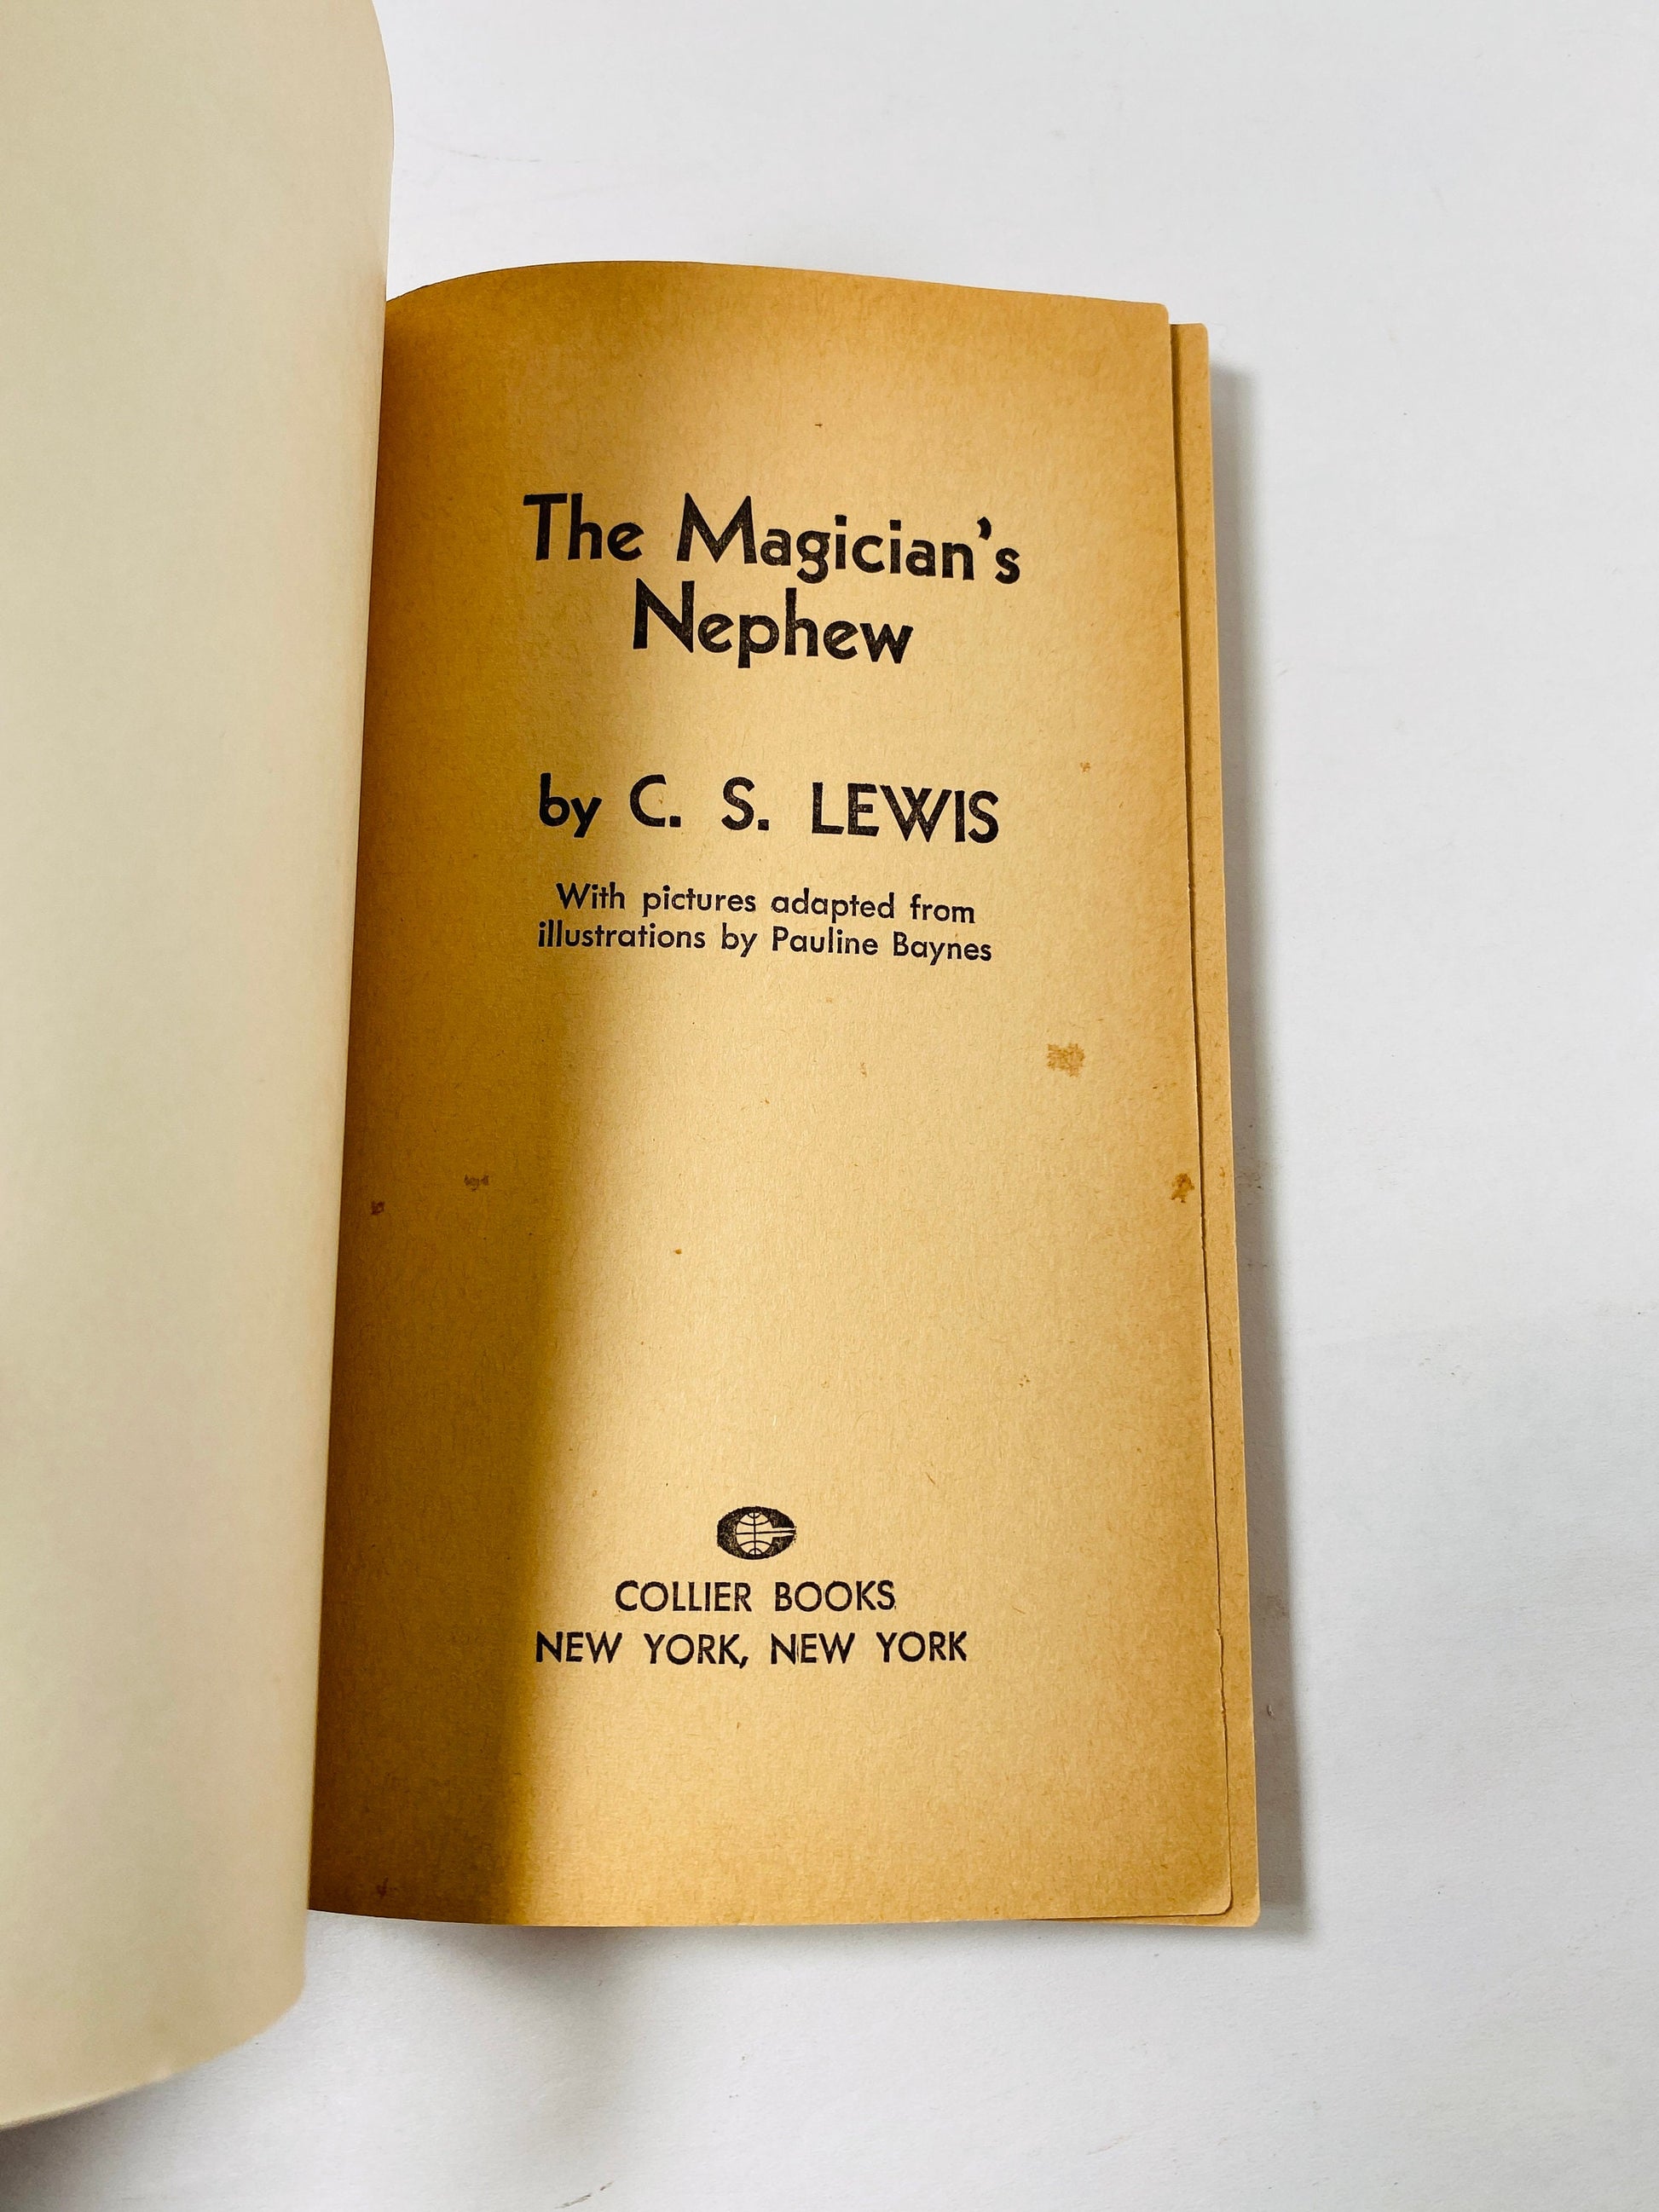 Magician's Nephew vinage paperback book by CS Lewis circa 1973 part of Chronicles of Narnia Series Lion the Witch and the Wardrobe Collier